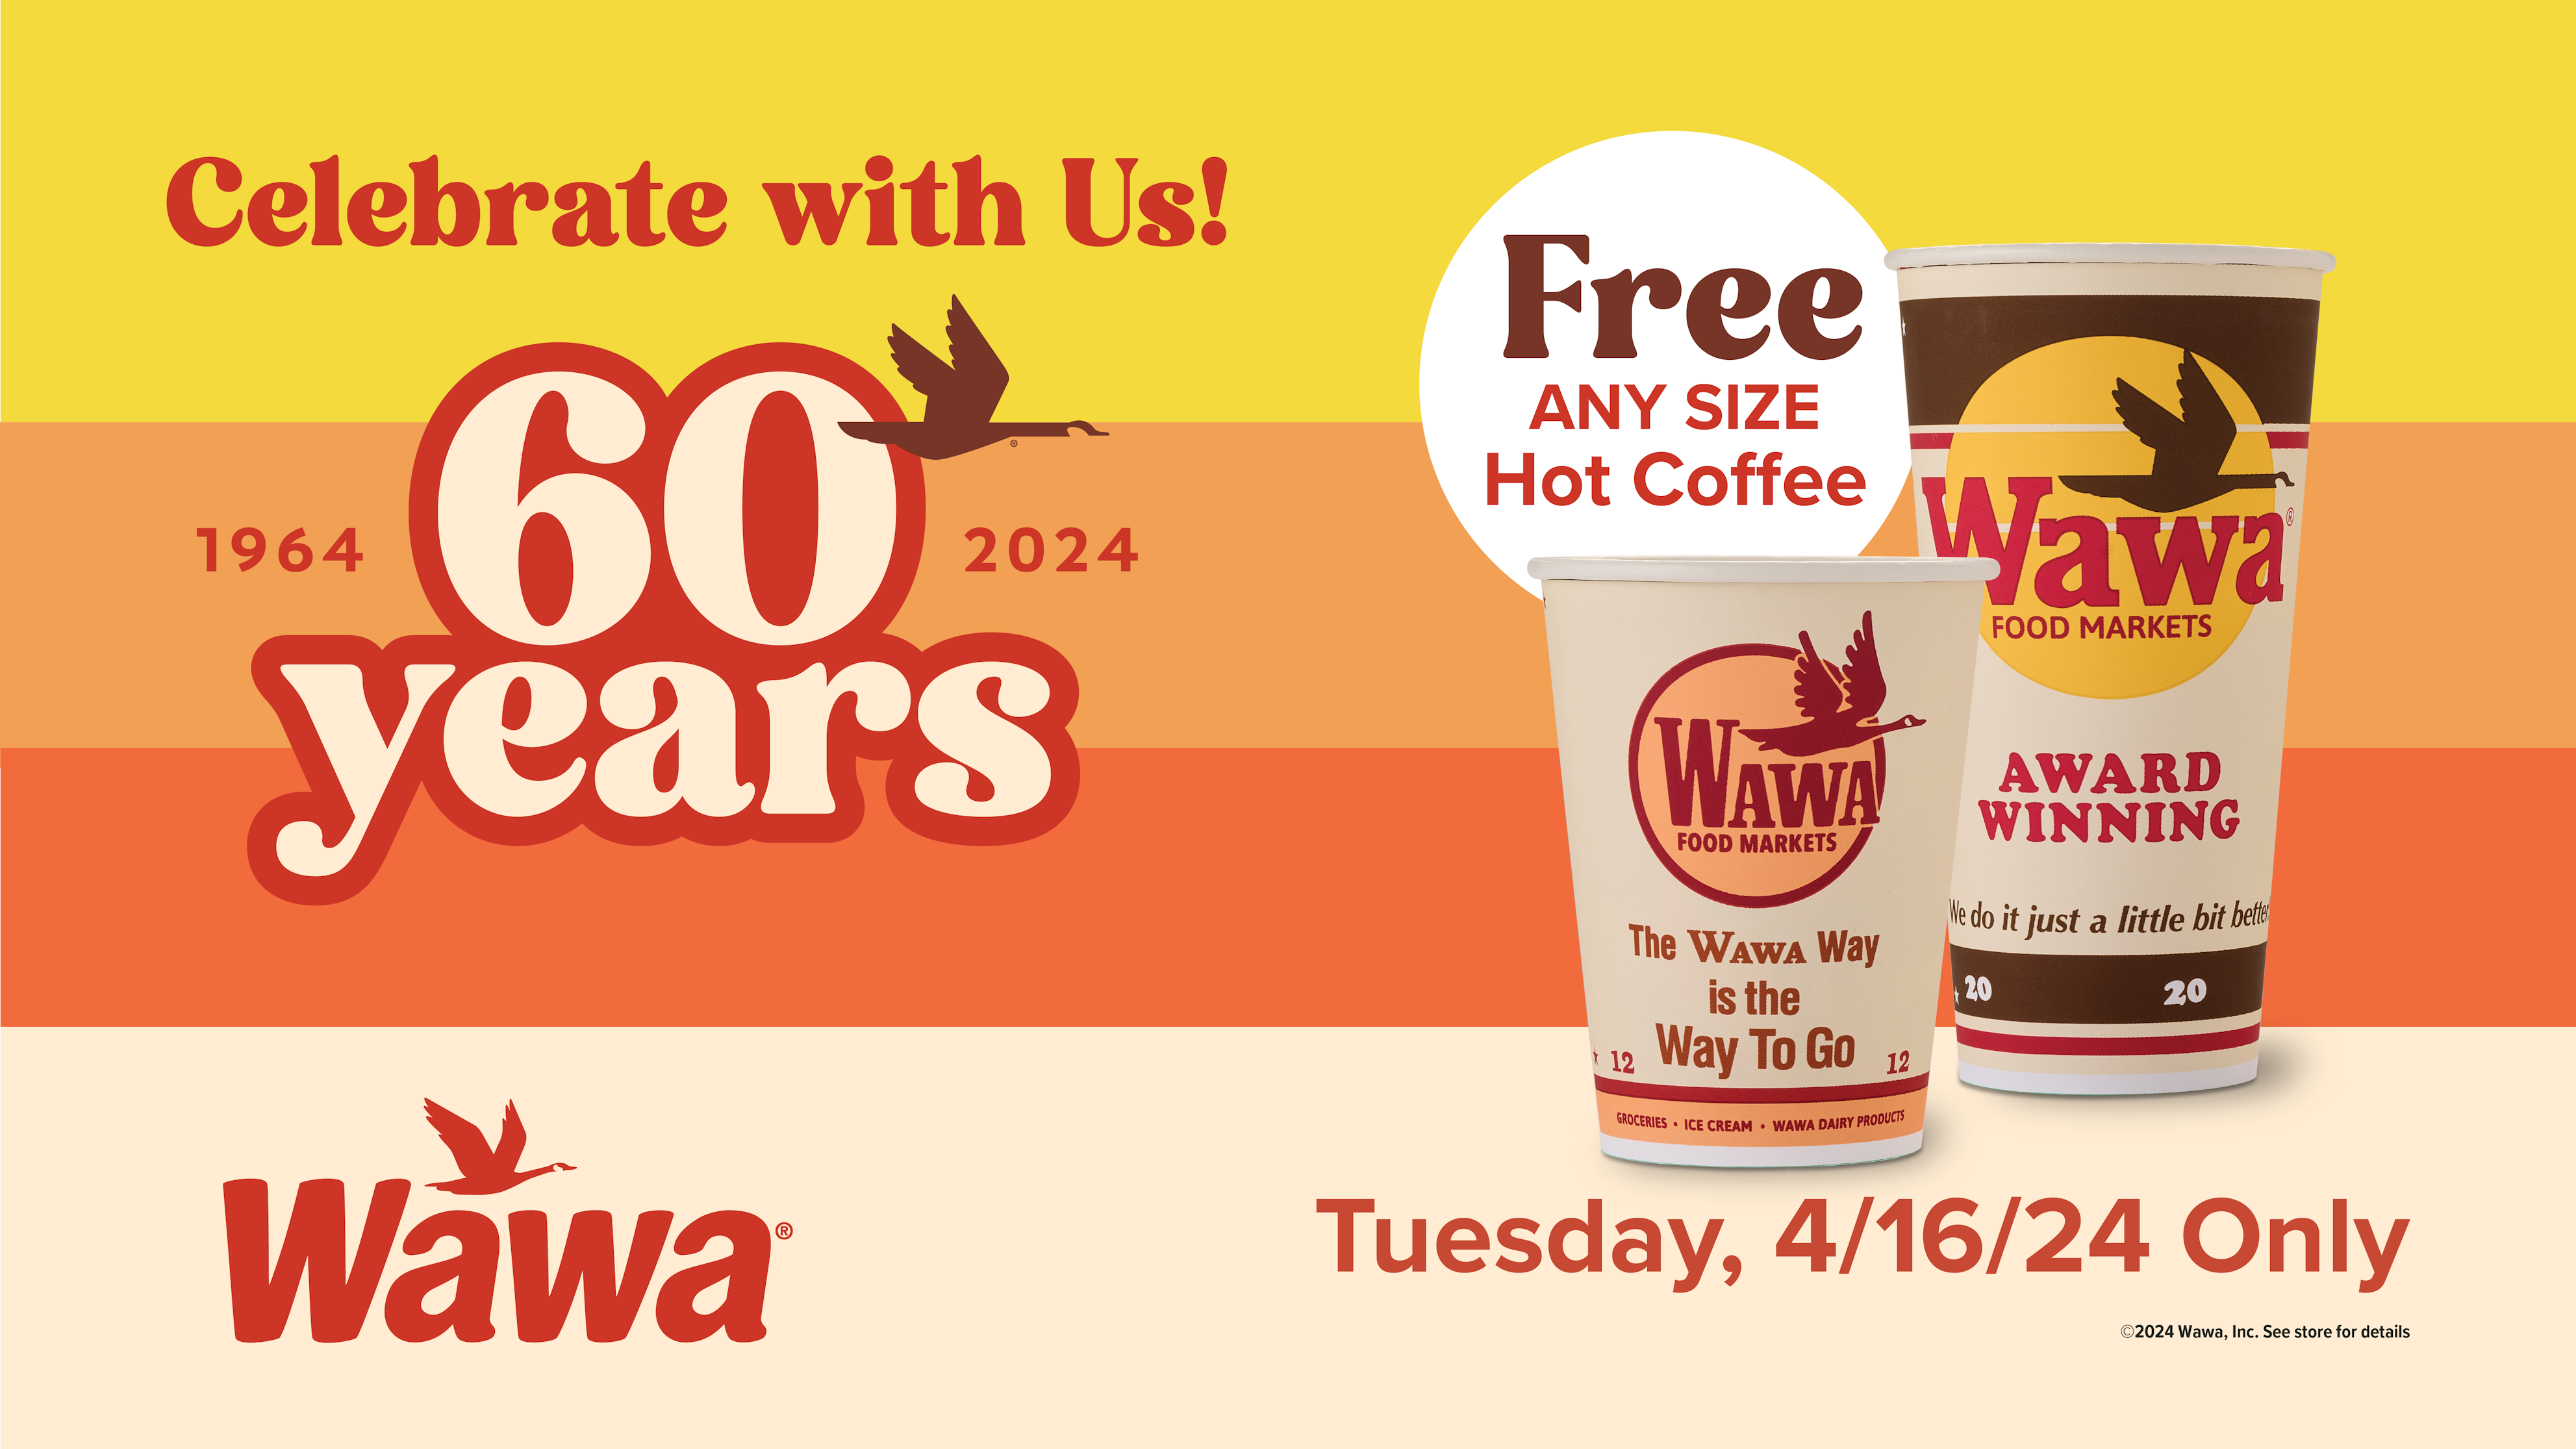 wawa is giving customers free coffee in honor of its 60th anniversary: what to know